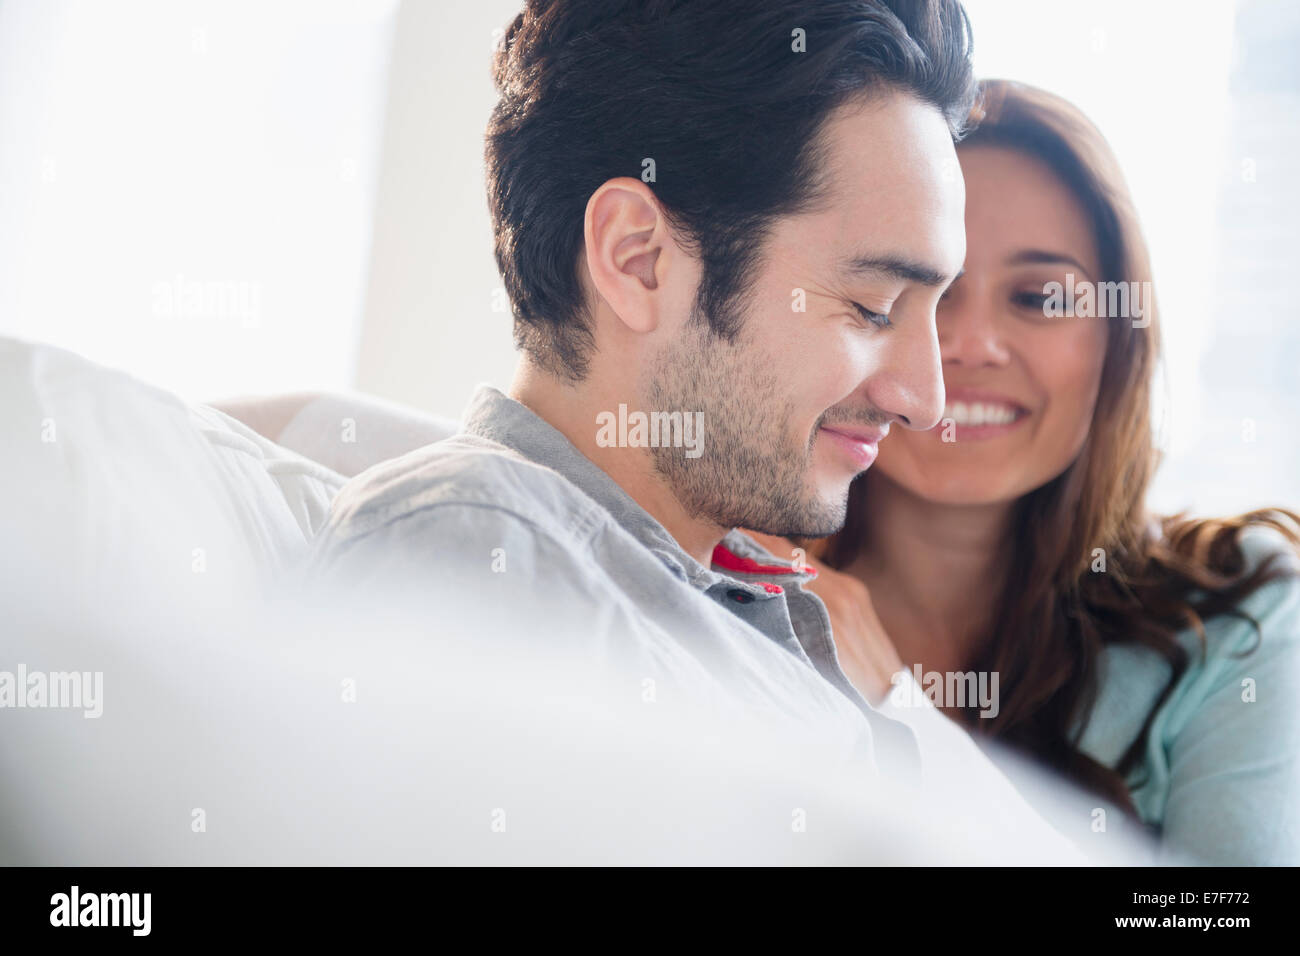 Couple smiling together on sofa Stock Photo